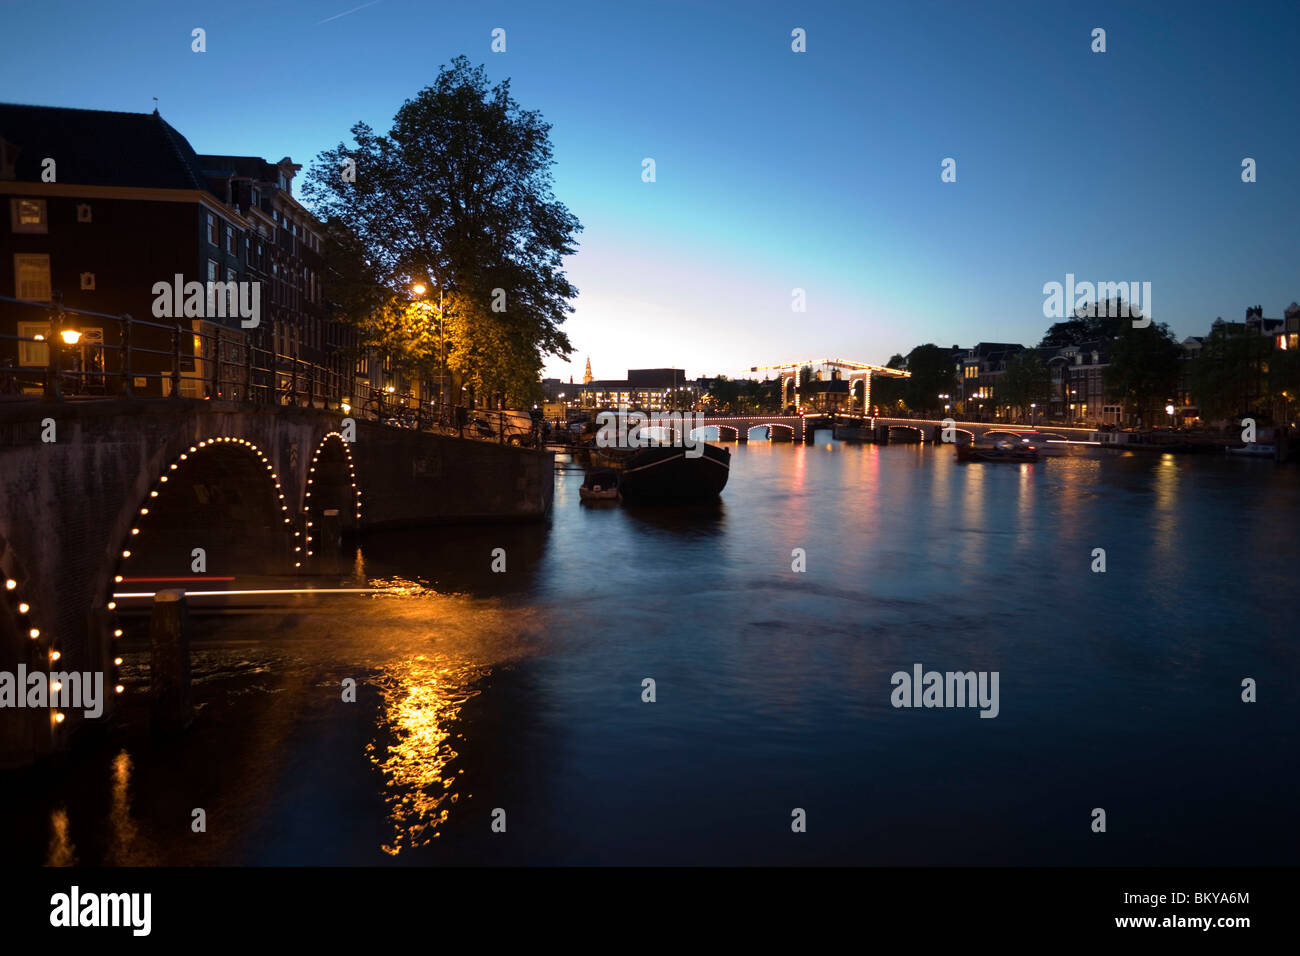 Boats, Magere Brug, Amstel, View over illuminated Magere Brug Skinny Bridge, to Stopera and Zuiderkerk at night, Amsterdam, Holl Stock Photo